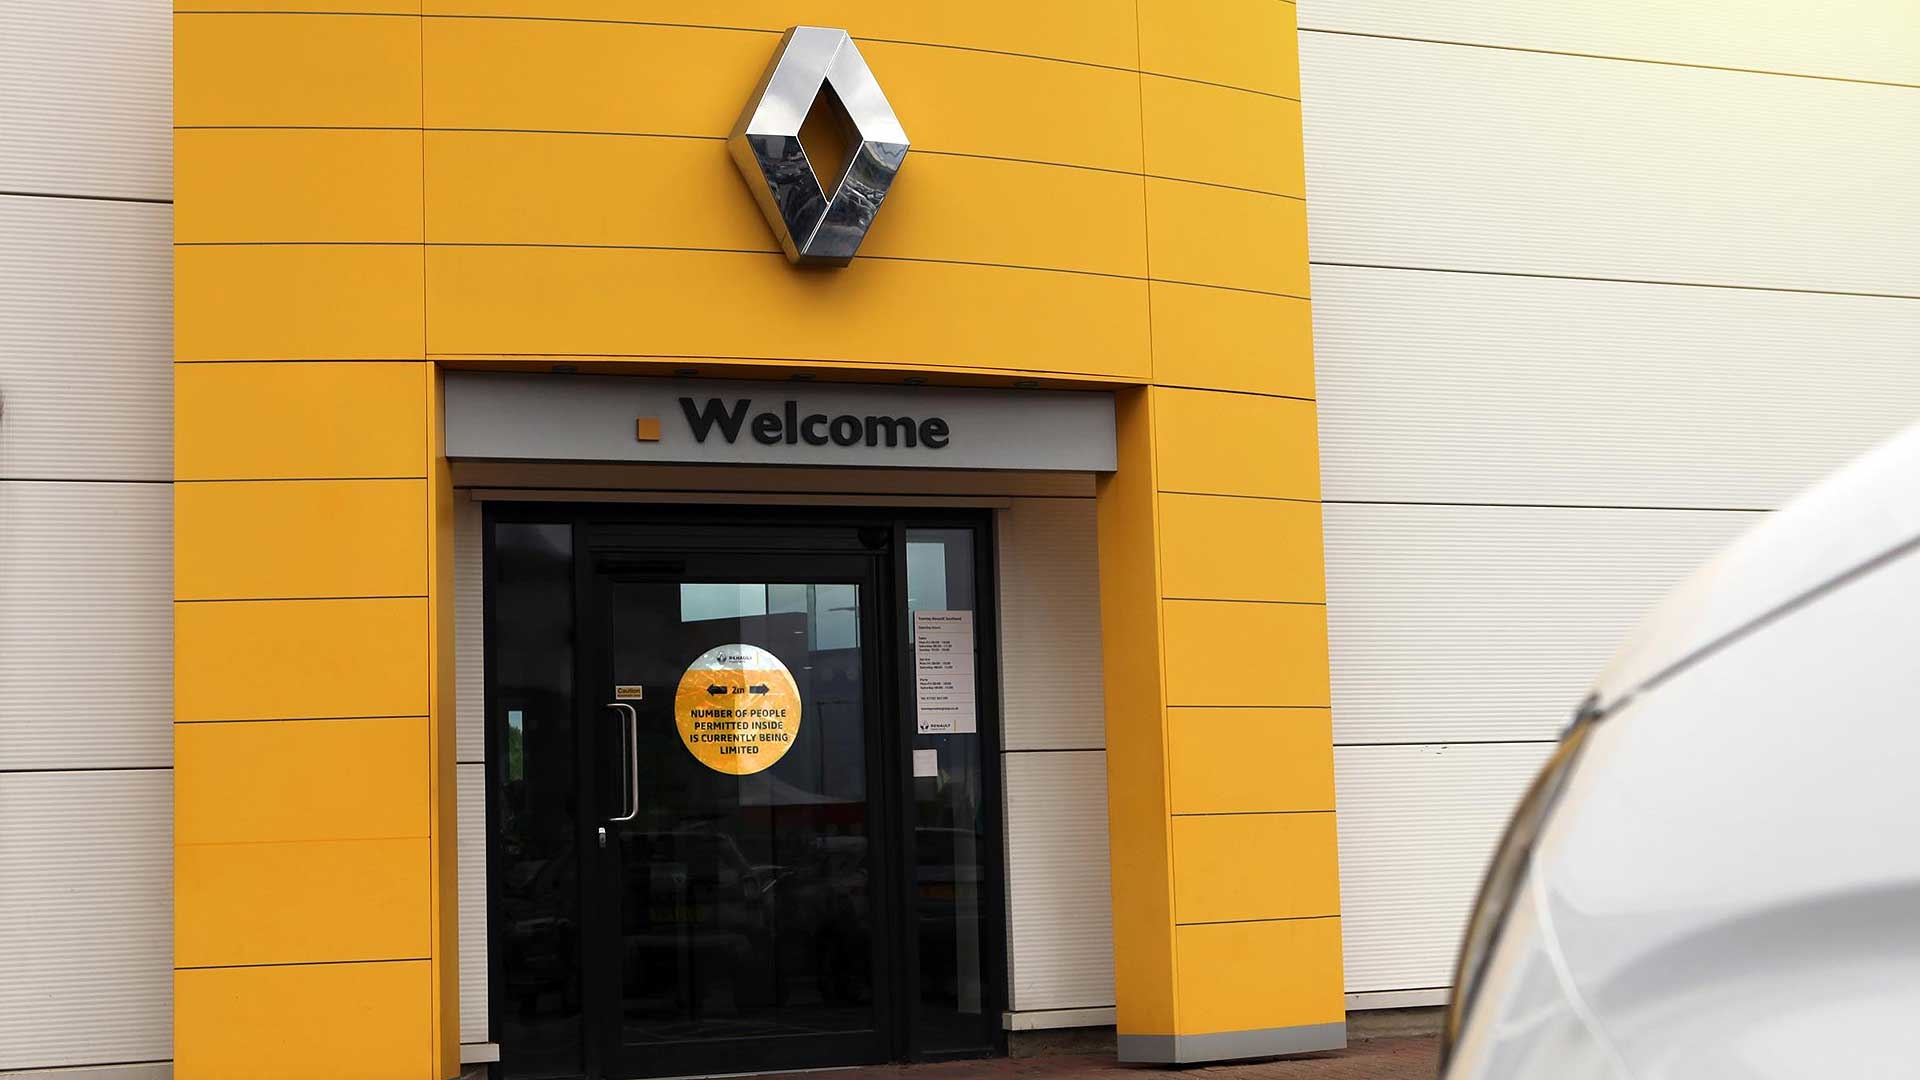 A Renault car dealer reopens with Covid-friendly measures